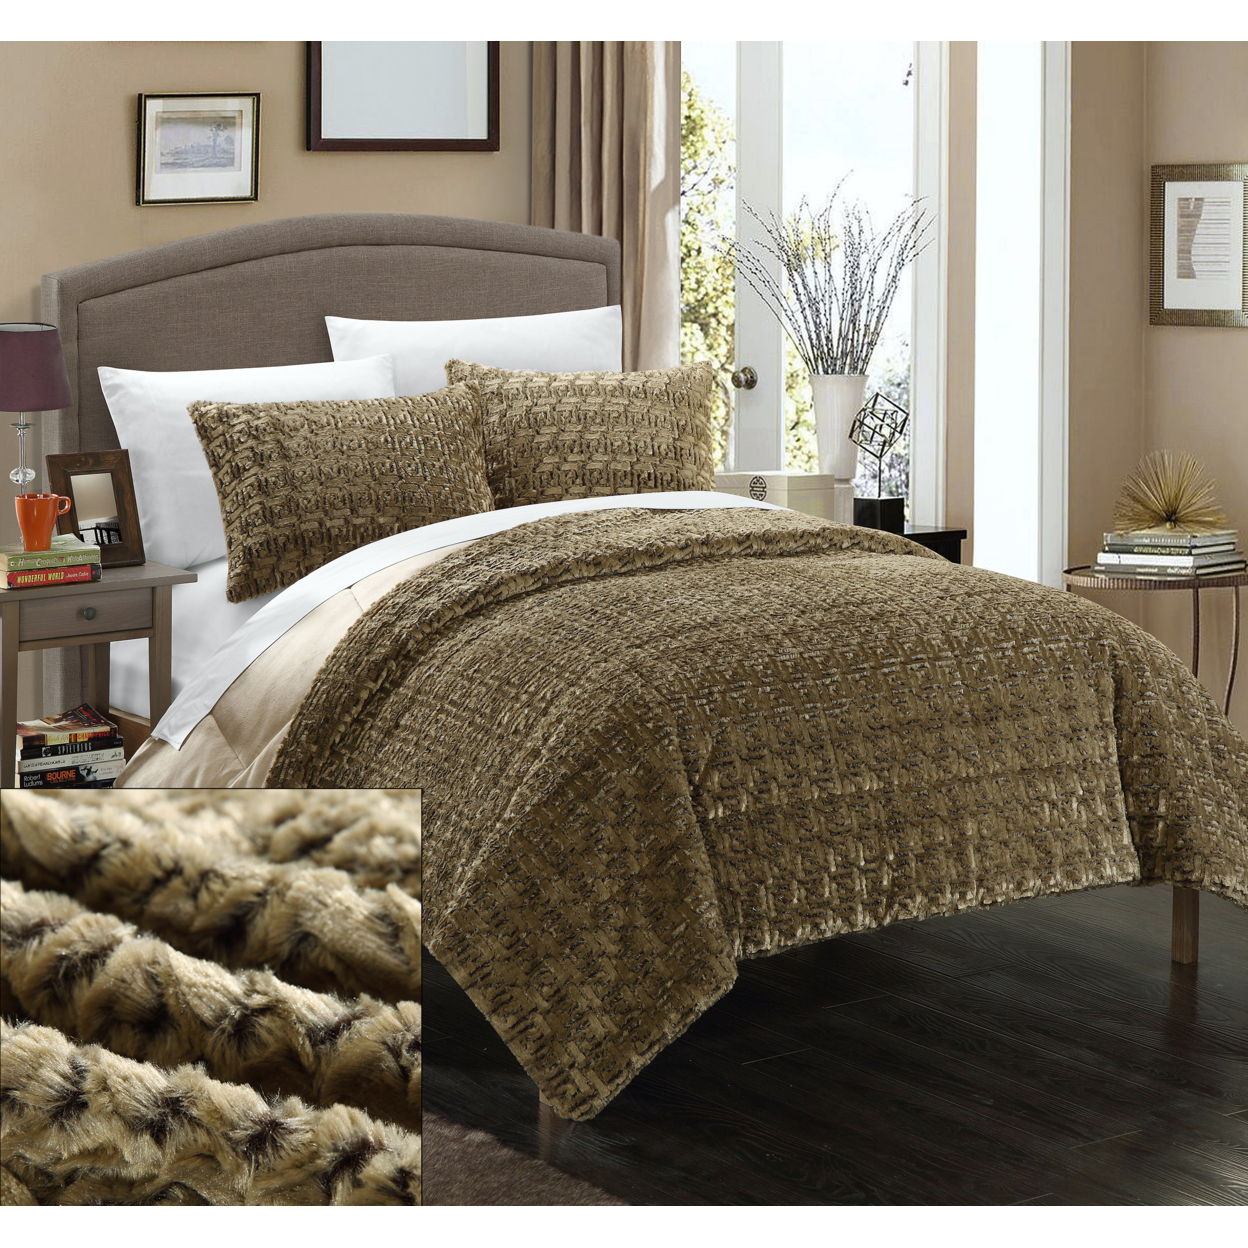 Chic Home 3 Piece Petras NEW FAUX FUR COLLECTION! With Mink Like Backing In Greek Key Design Comforter Set - Beige